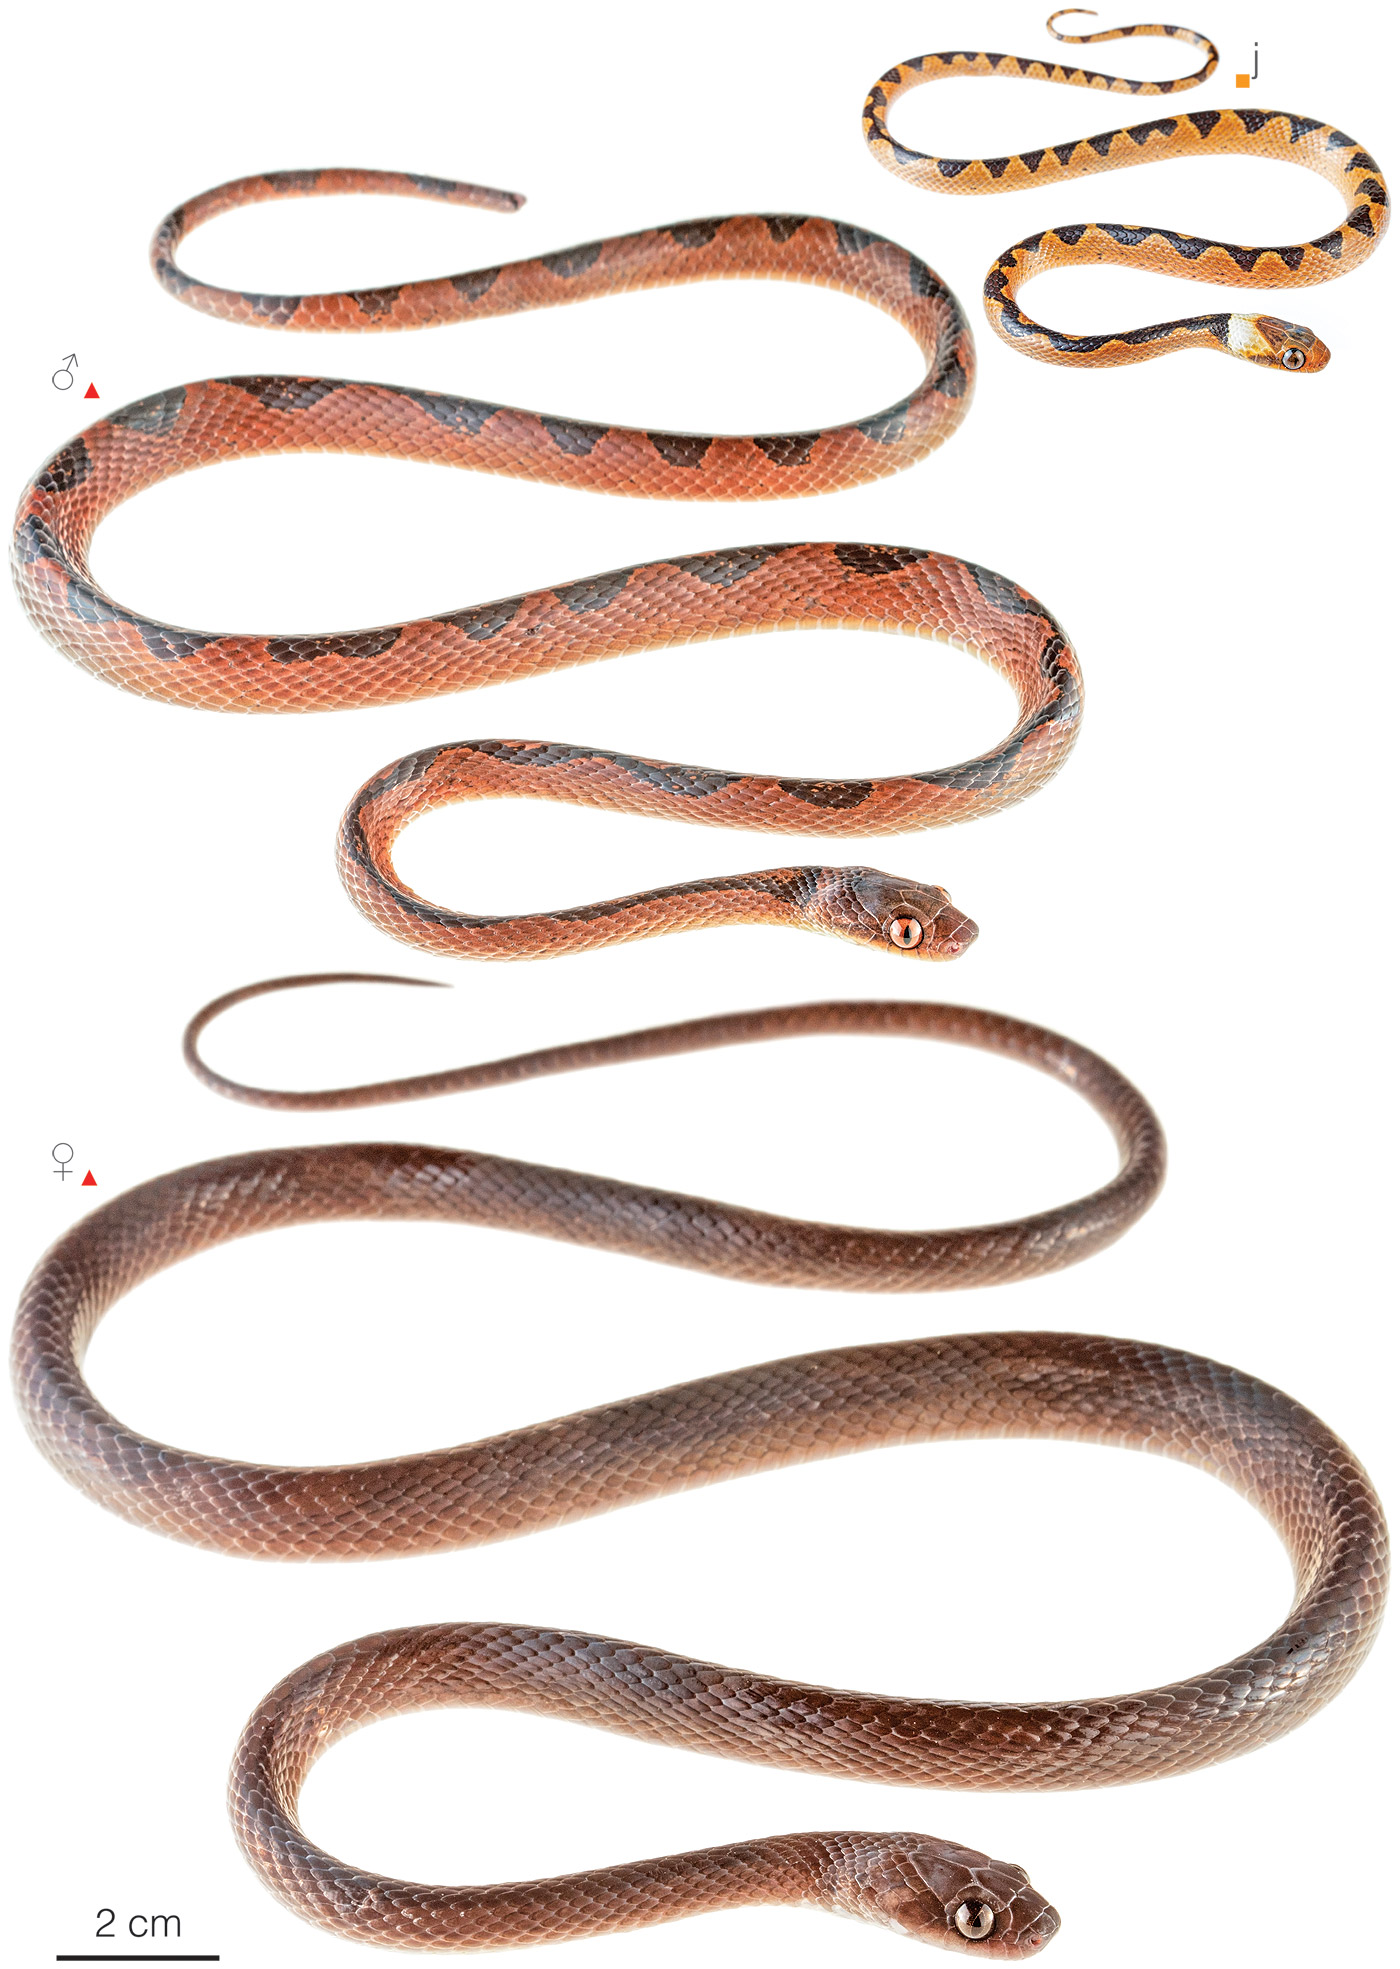 Figure showing variation among individuals of Leptodeira approximans